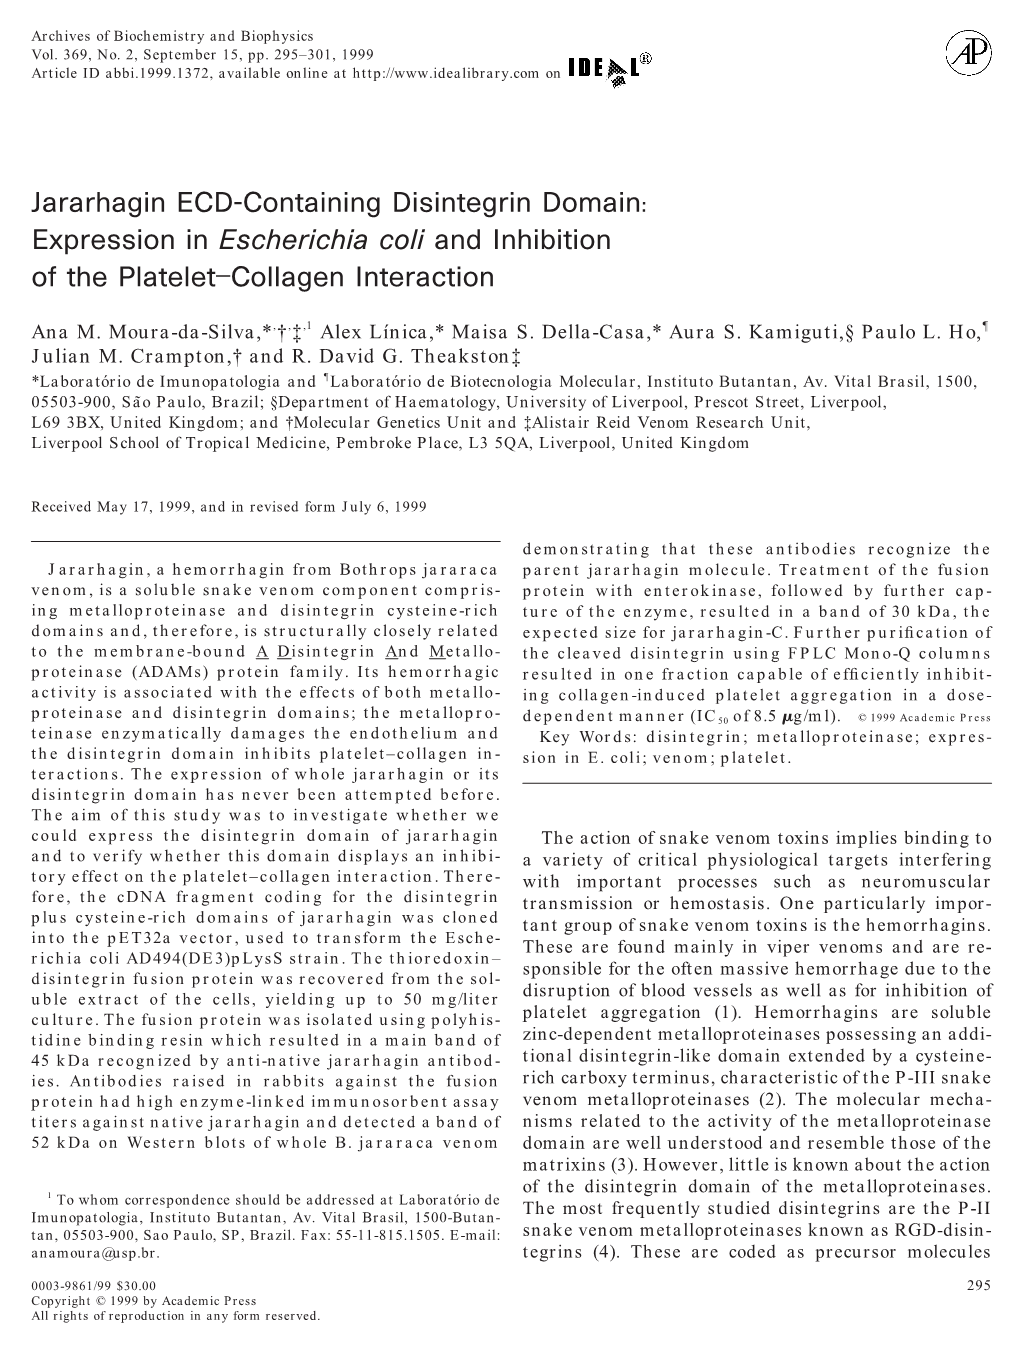 Jararhagin ECD-Containing Disintegrin Domain: Expression in Escherichia Coli and Inhibition of the Platelet–Collagen Interaction